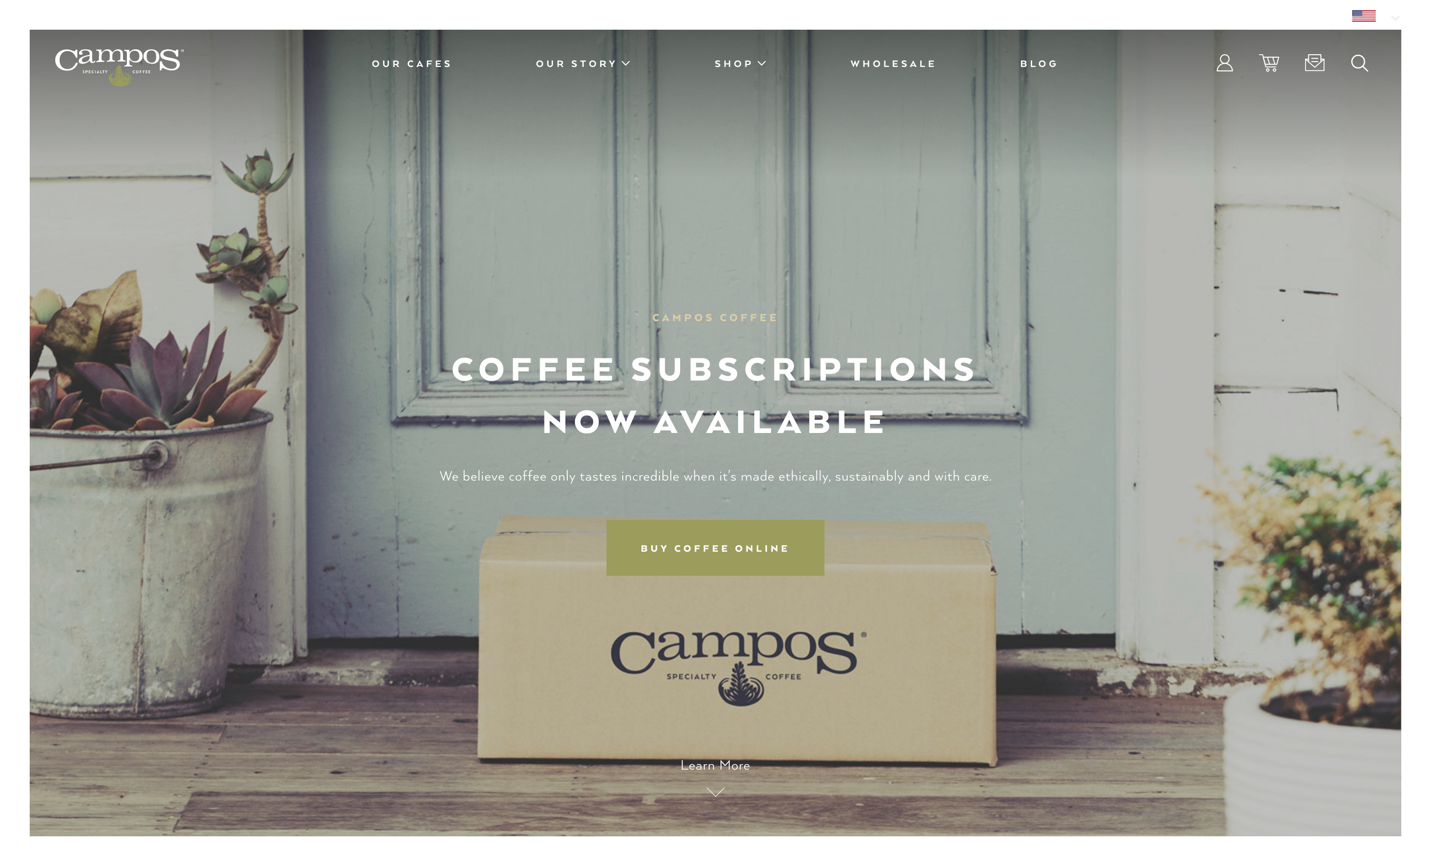 Screen of Campos’ Coffee main page